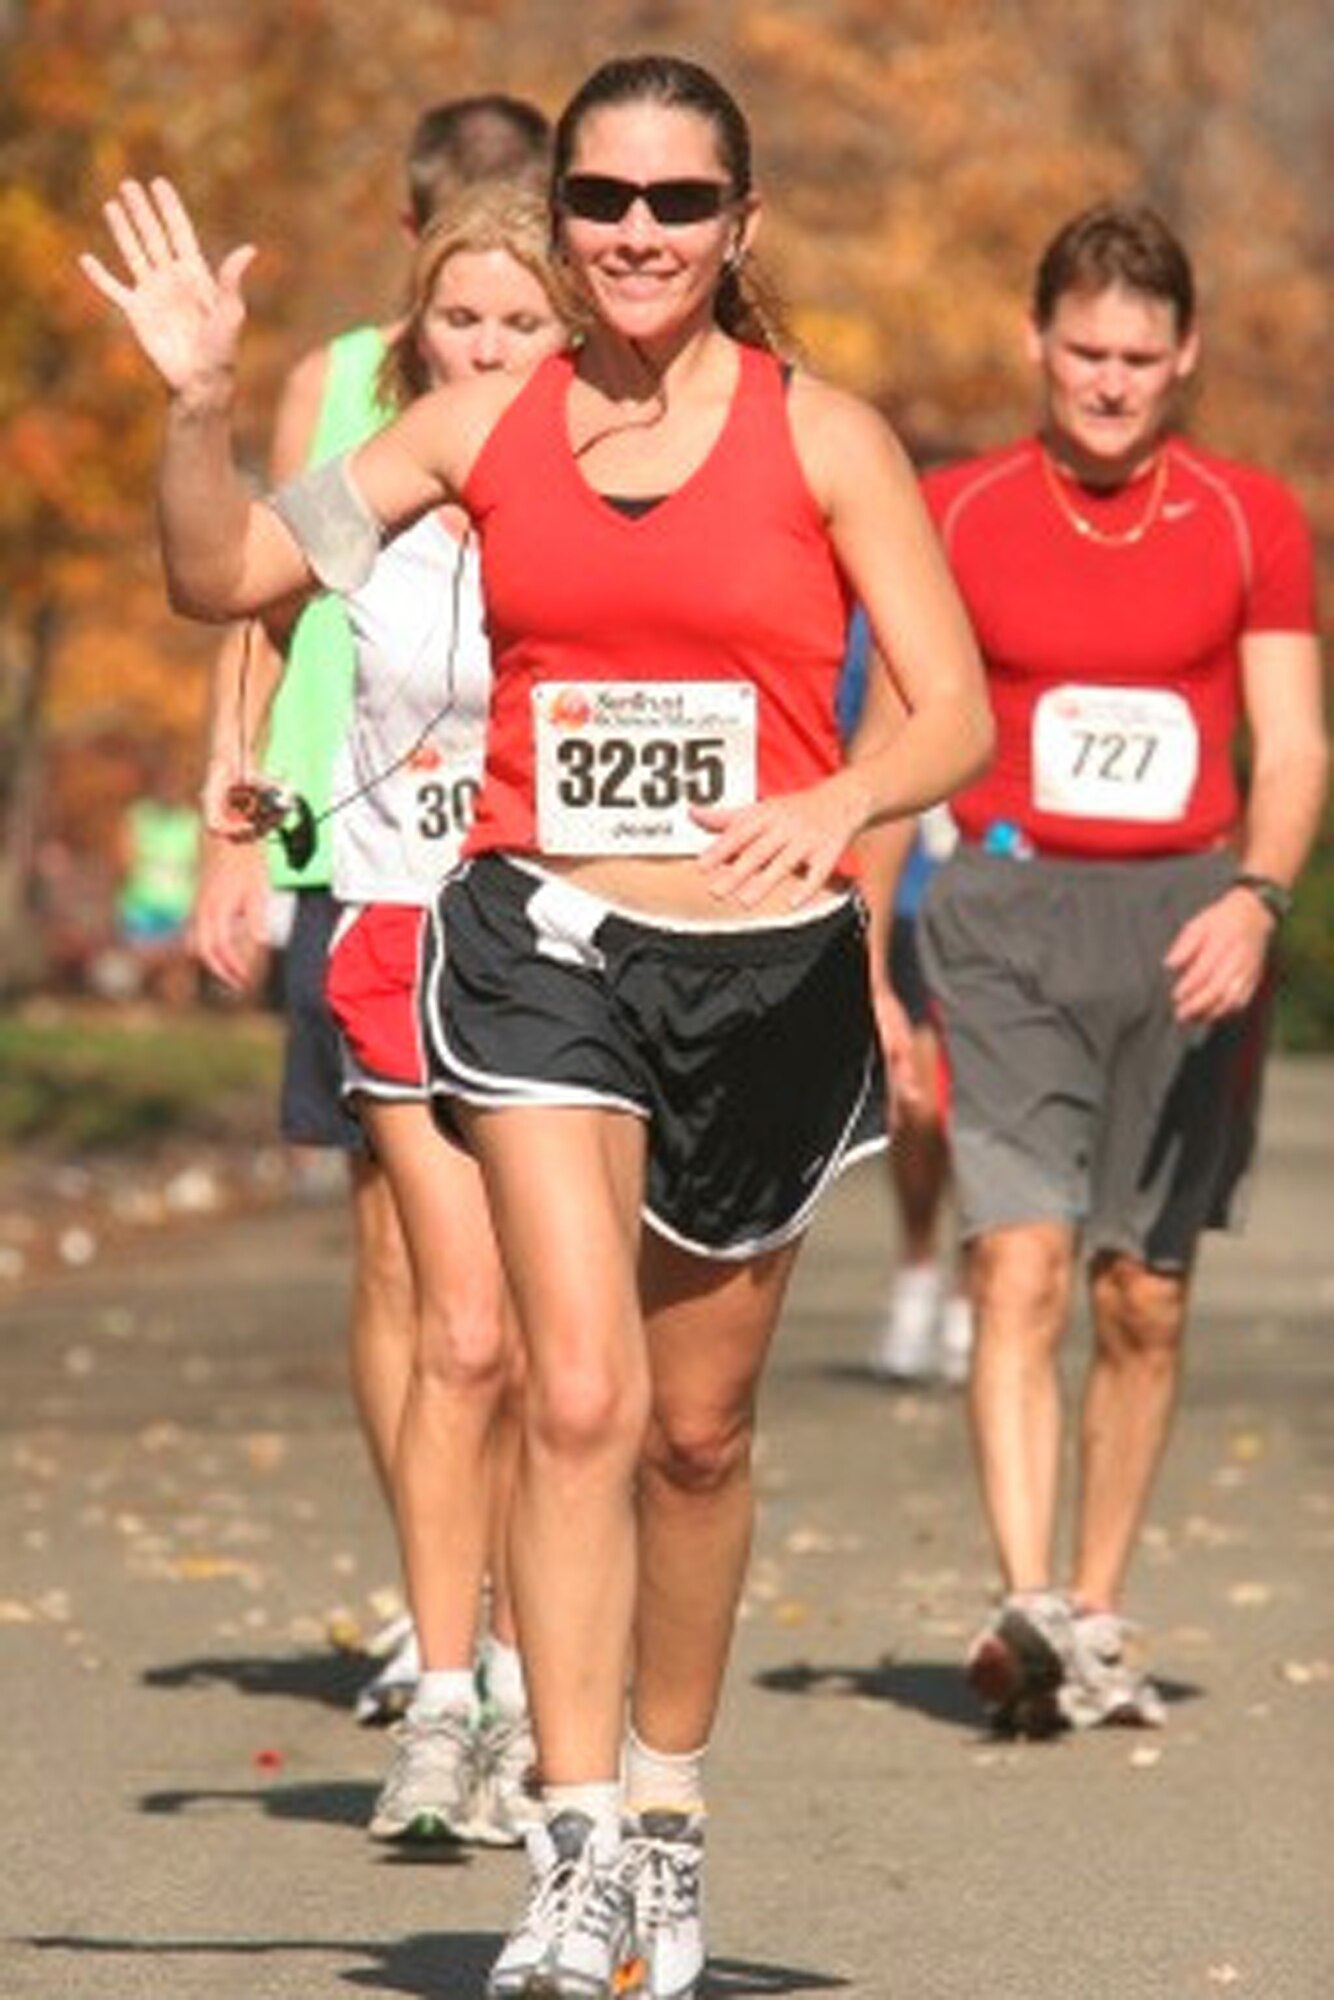 Senior Master Sgt. Jennifer Burg enjoys a "relaxing" moment at the Nov. 11, 2006 Richmond (Va.) Marathon, where she broke the 4-hour barrier and placed 34th of 200 in her 35-39 age group. (Photo courtesy of Senior Master Sgt. Jennifer Burg.)